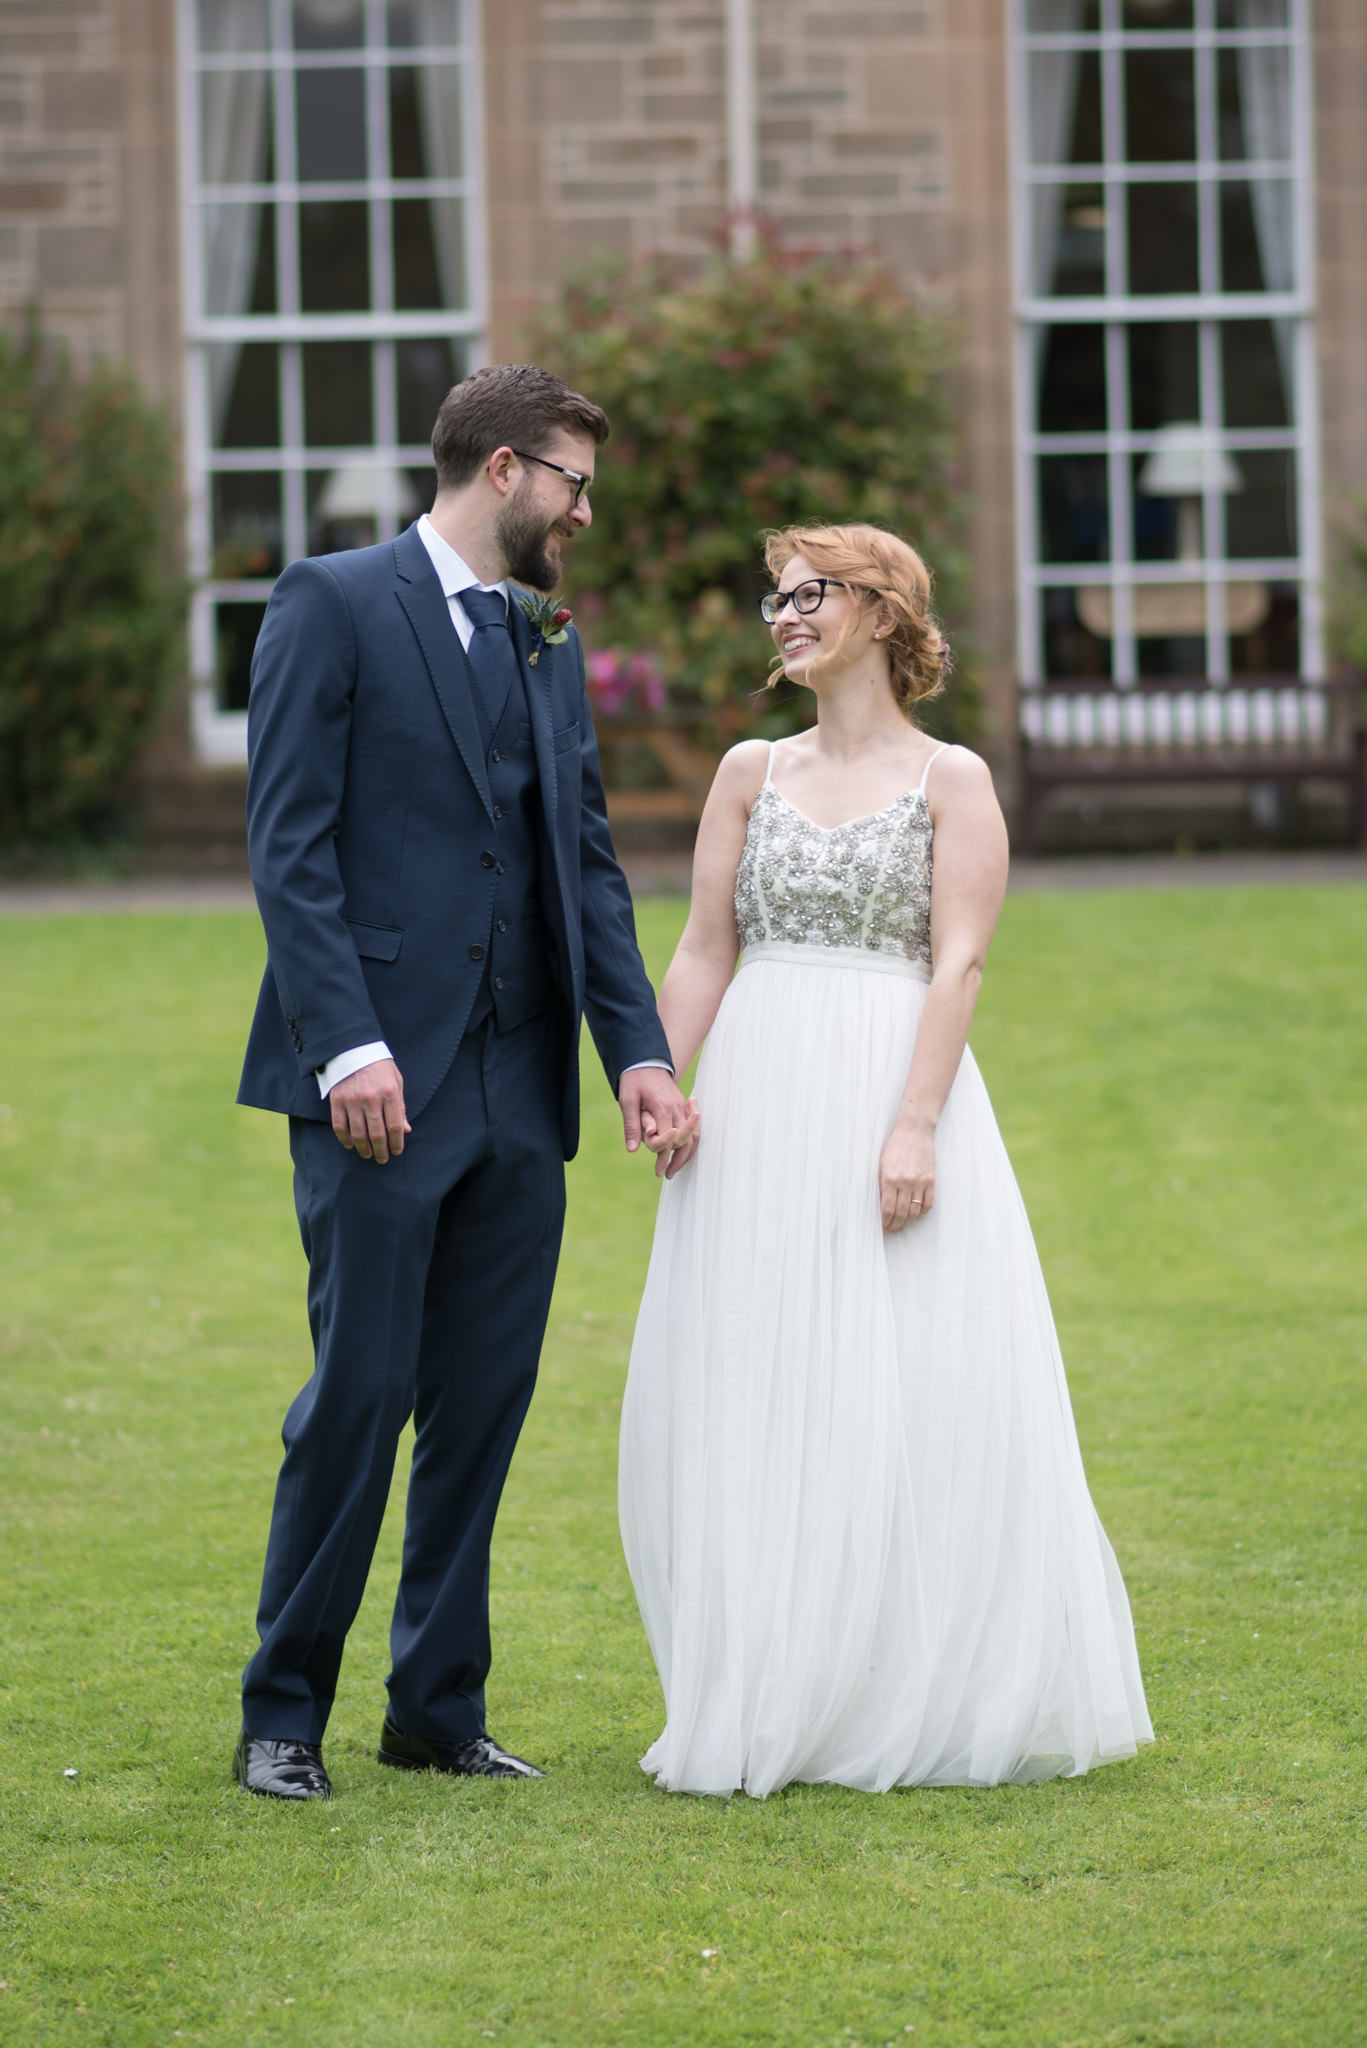  Emily and Randall's wedding at Abden House, Edinburgh  © Julie Broadfoot - www.photographybyjuliebee.co.uk 